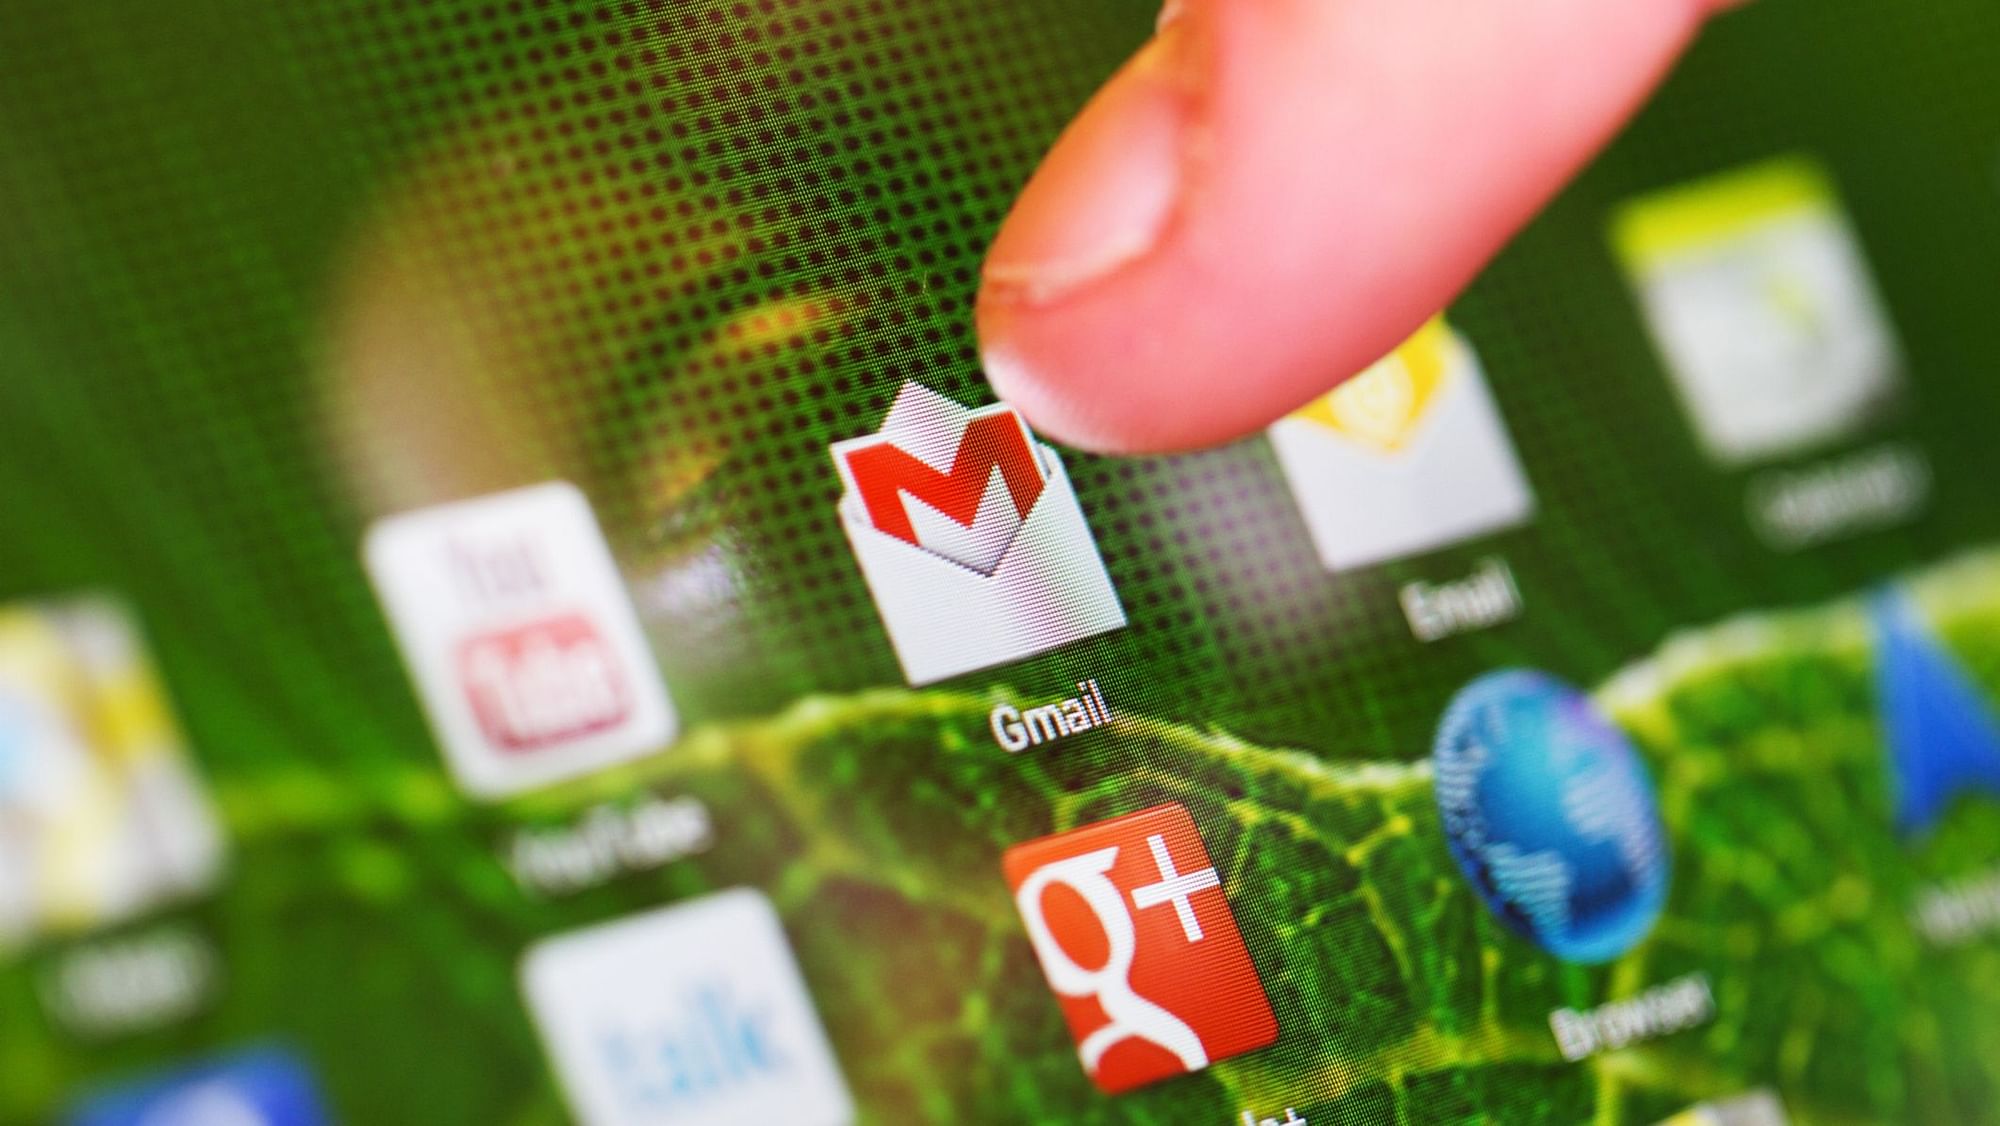 Gmail on mobile gets Dynamic Mail feature.